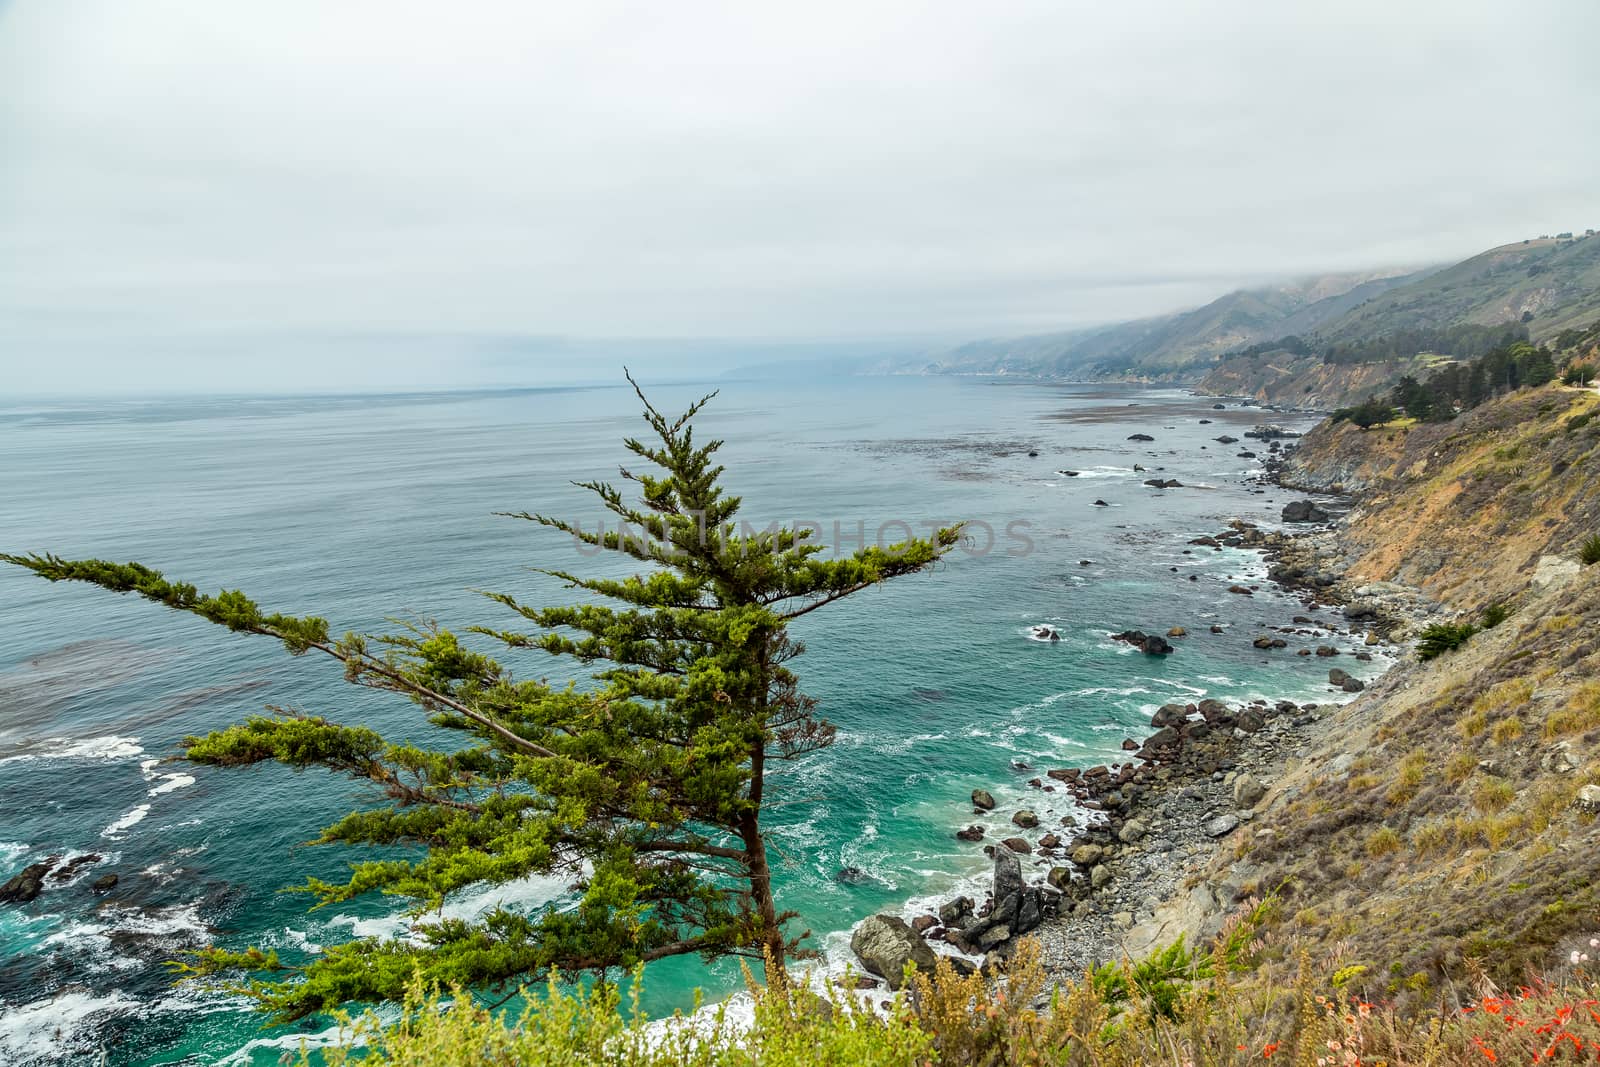 All-American Road, Big Sur, California, clouds, coast, coastline, debris, grass, green, mountains, ocean, overcast, Pacific, Pacific Coast Highway, PCH, rocks, sea, shore, sky, State Highway 1, view, water, waves